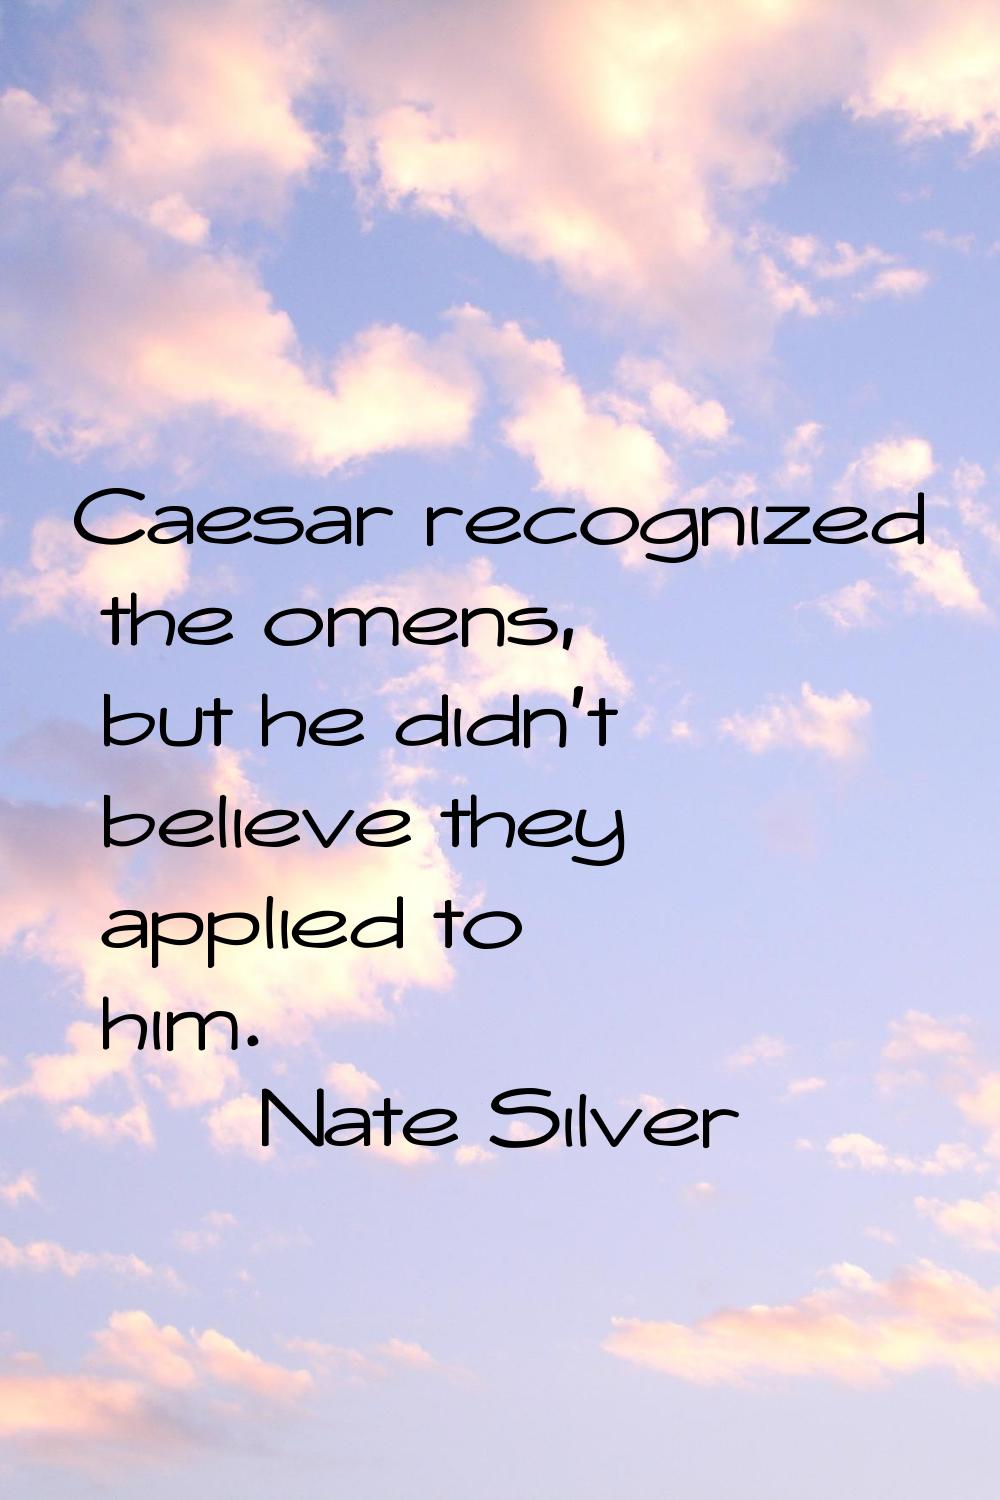 Caesar recognized the omens, but he didn't believe they applied to him.